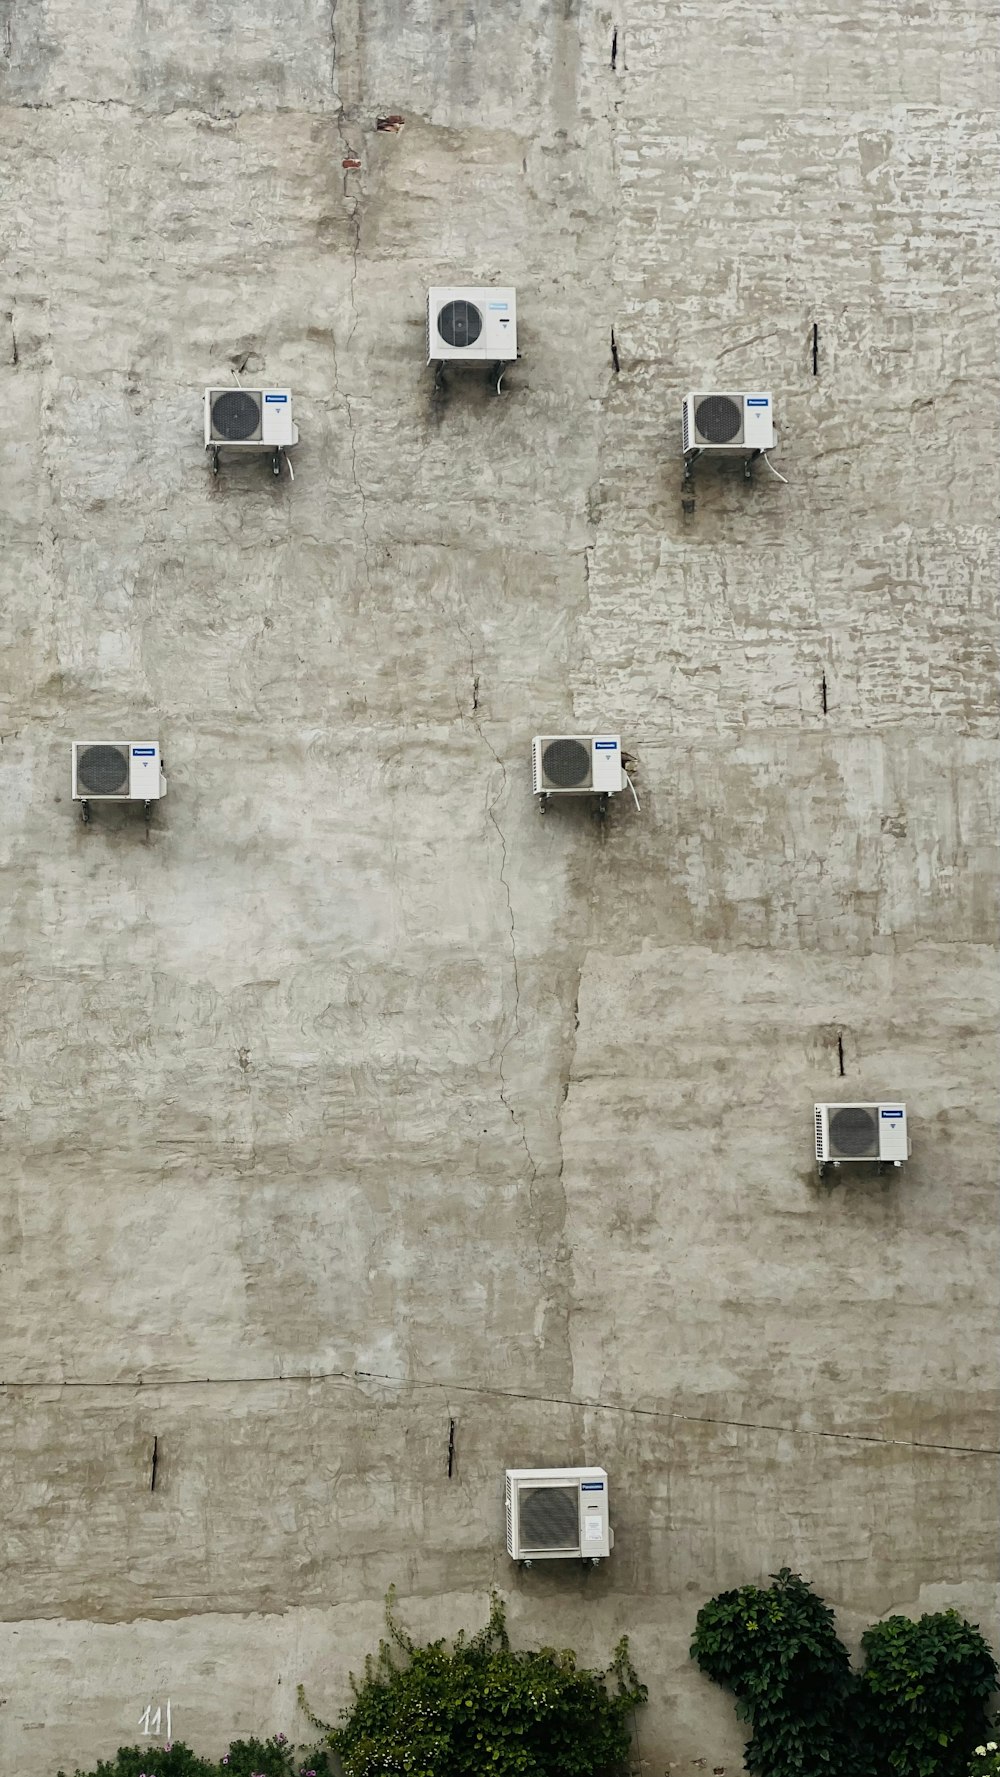 a wall with many air conditioners on it